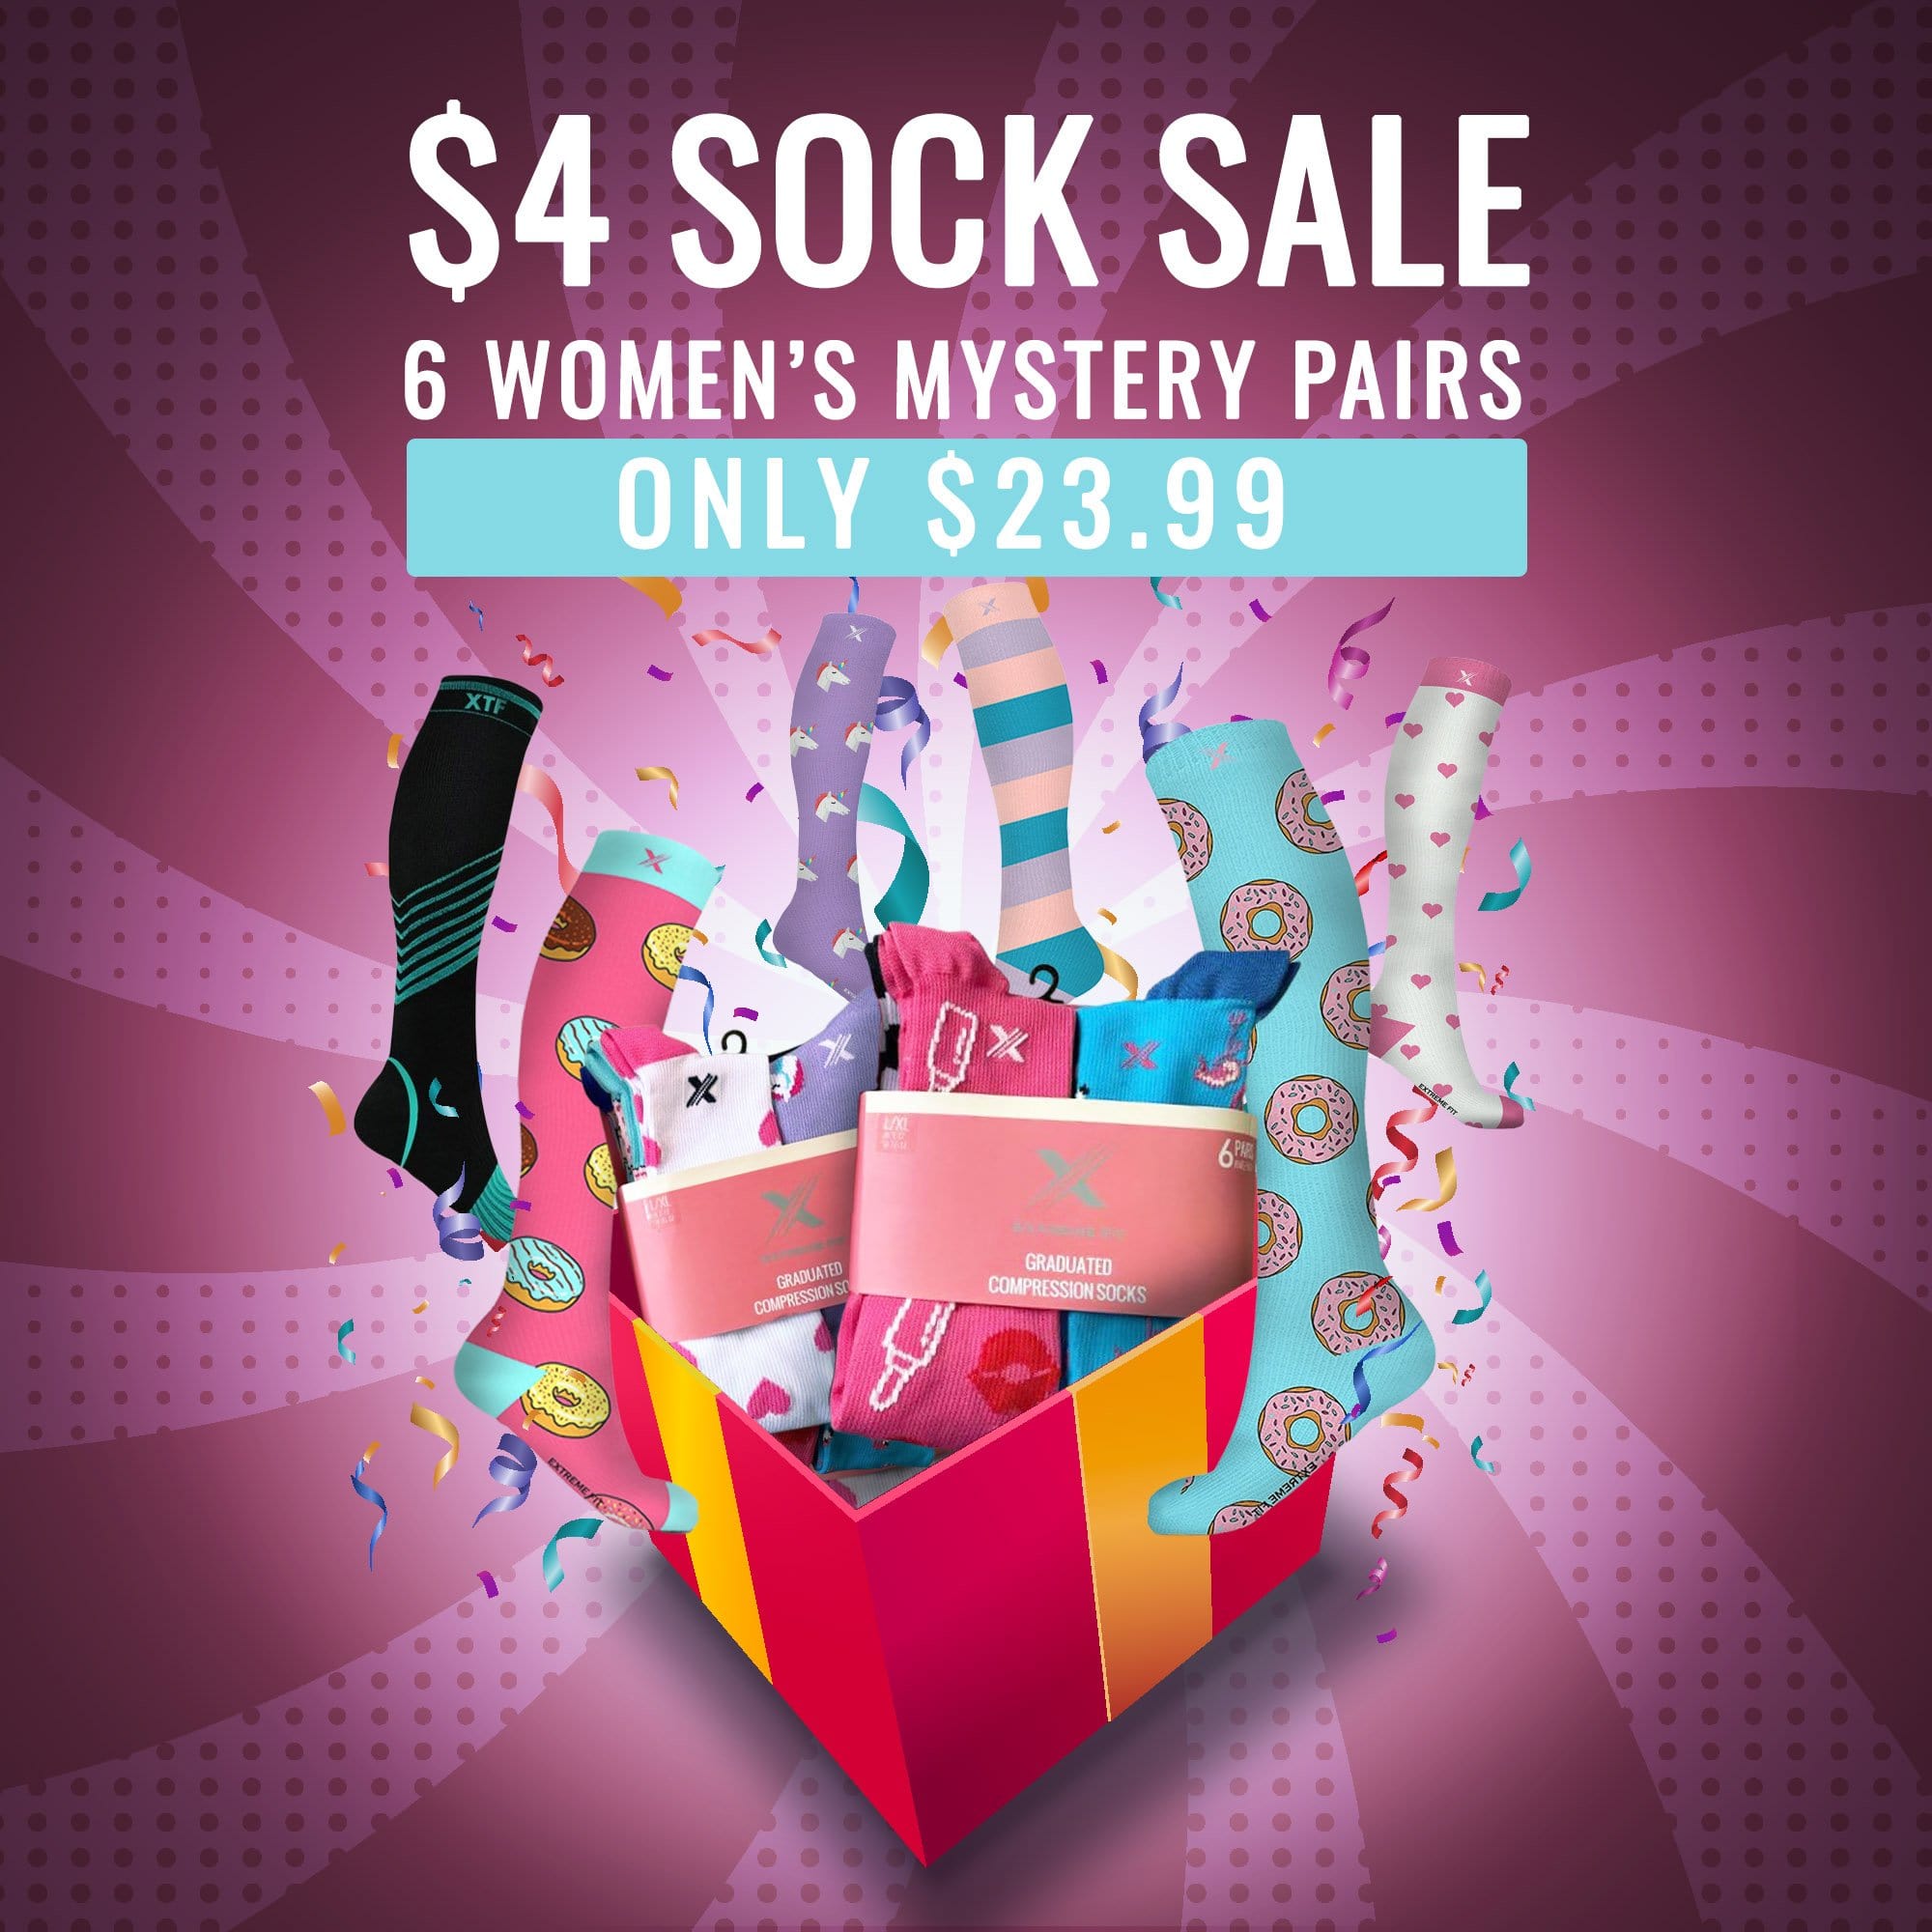 Extreme Fit - $4 SOCK SALE GRAB BAG - WOMEN'S (6-PAIRS) - Extreme Fit